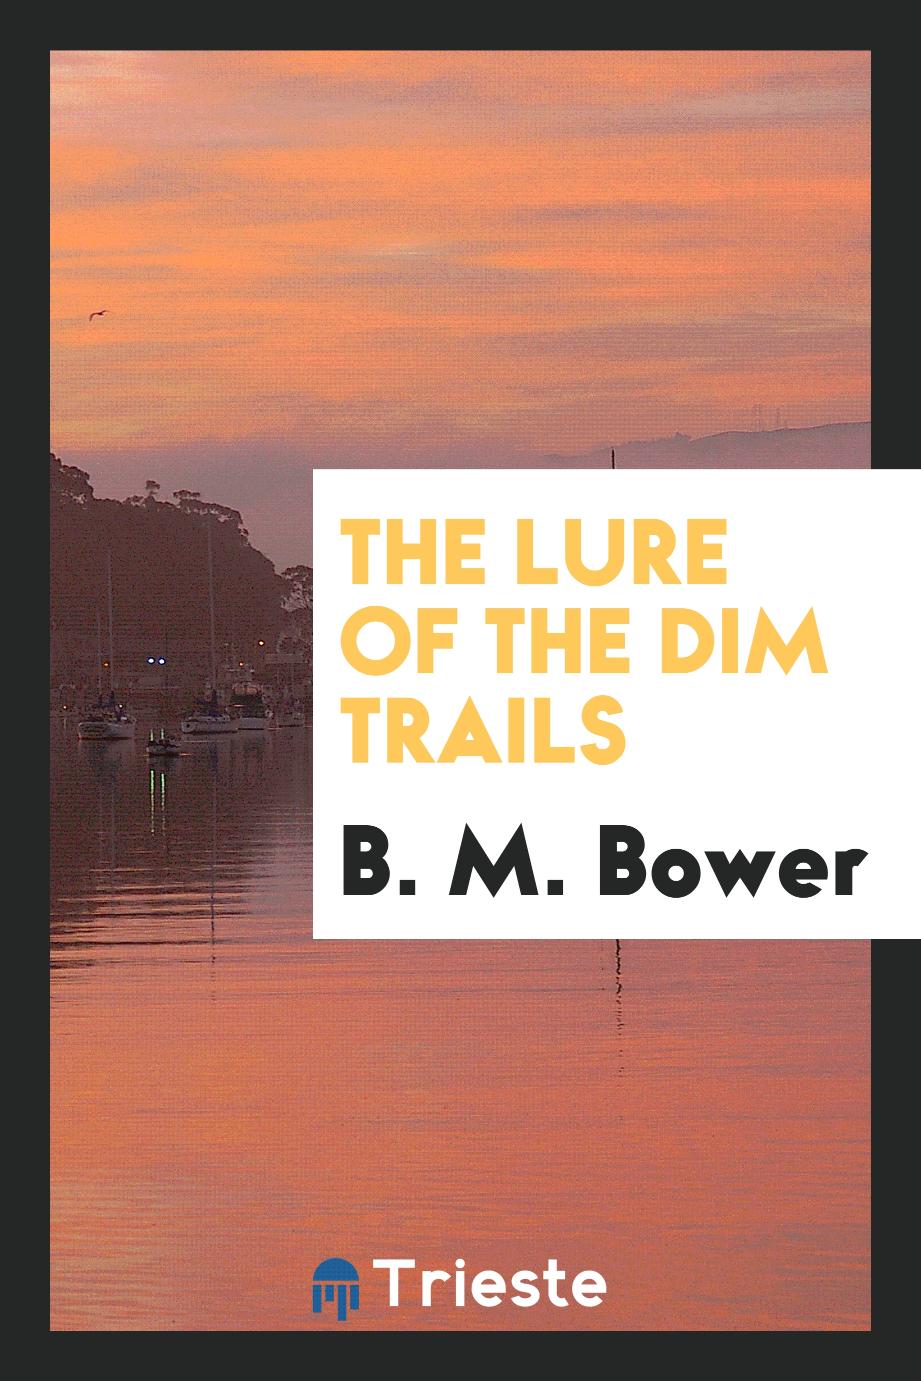 B. M. Bower - The lure of the dim trails